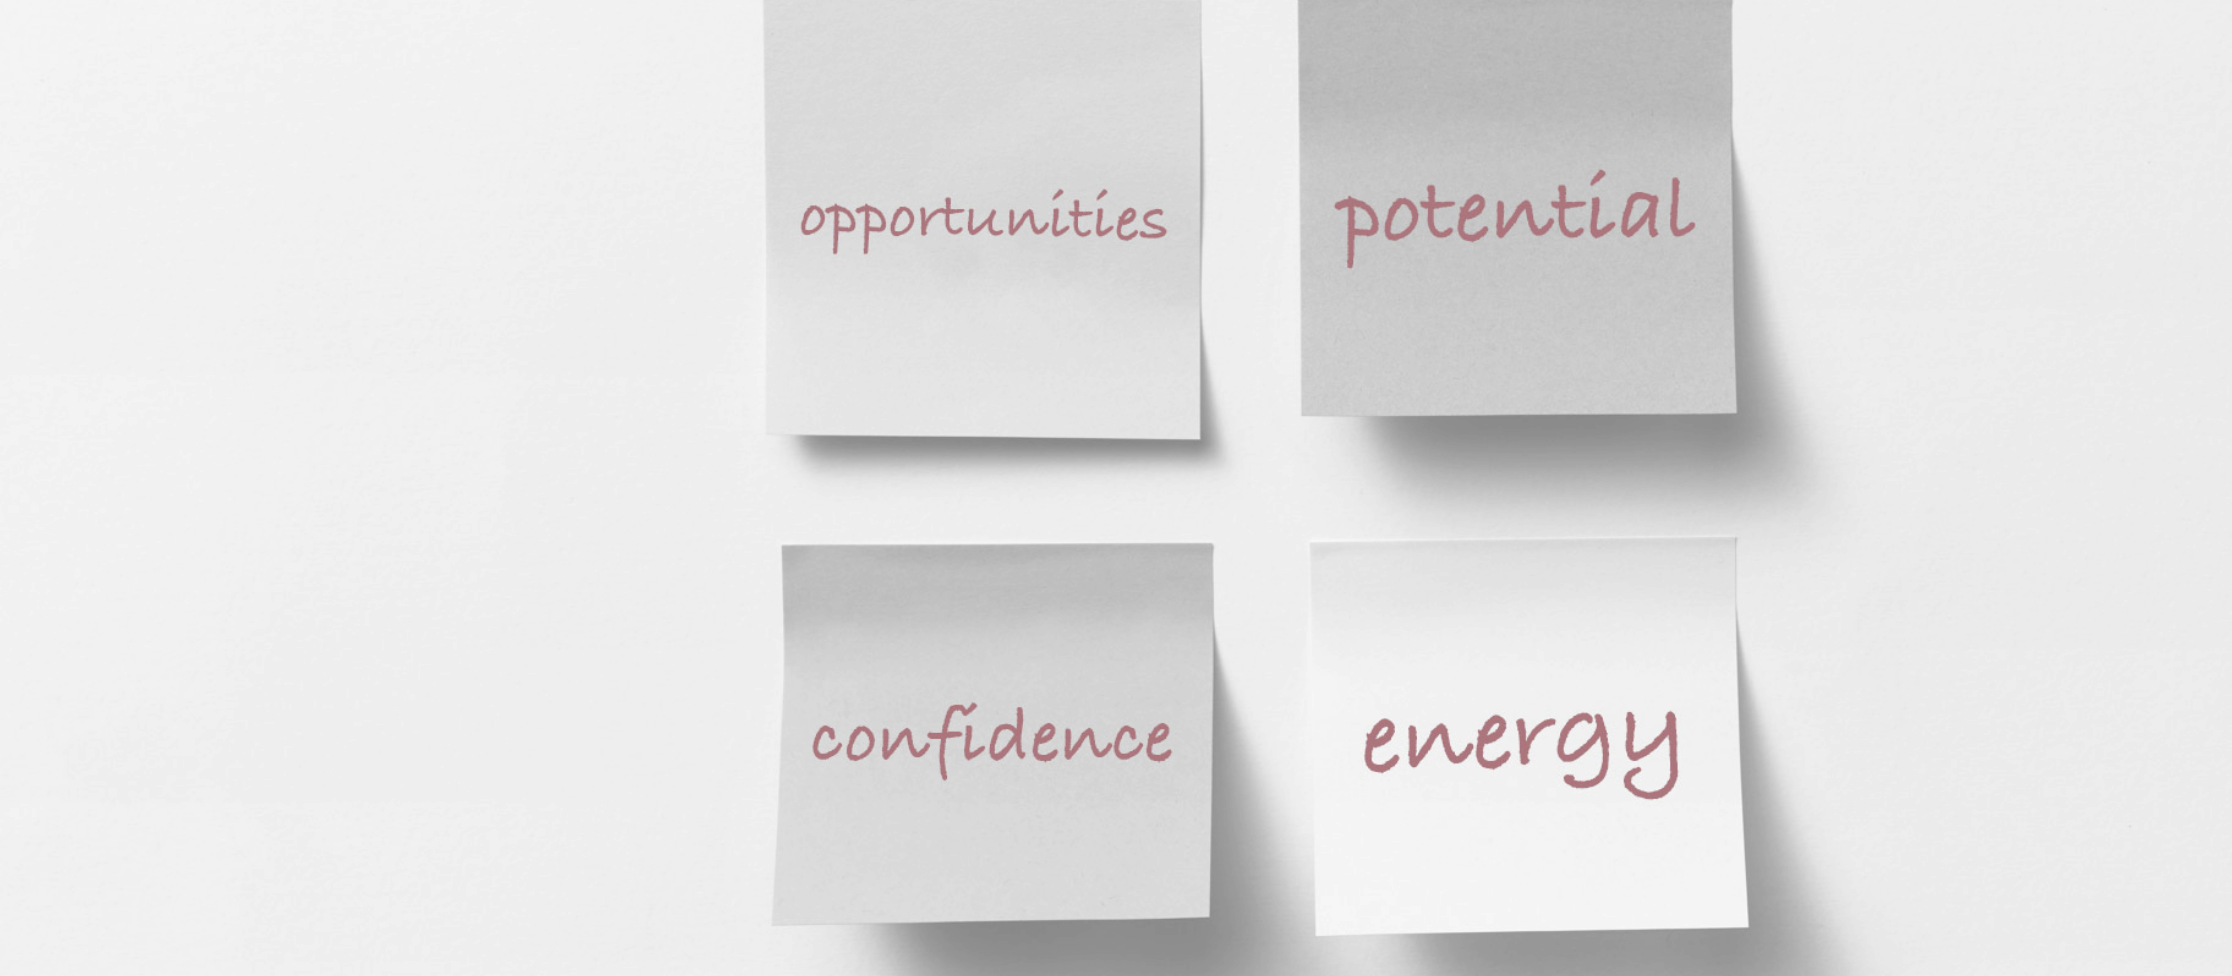 Executive Coaching: Opportunities, potential, confidence, energy